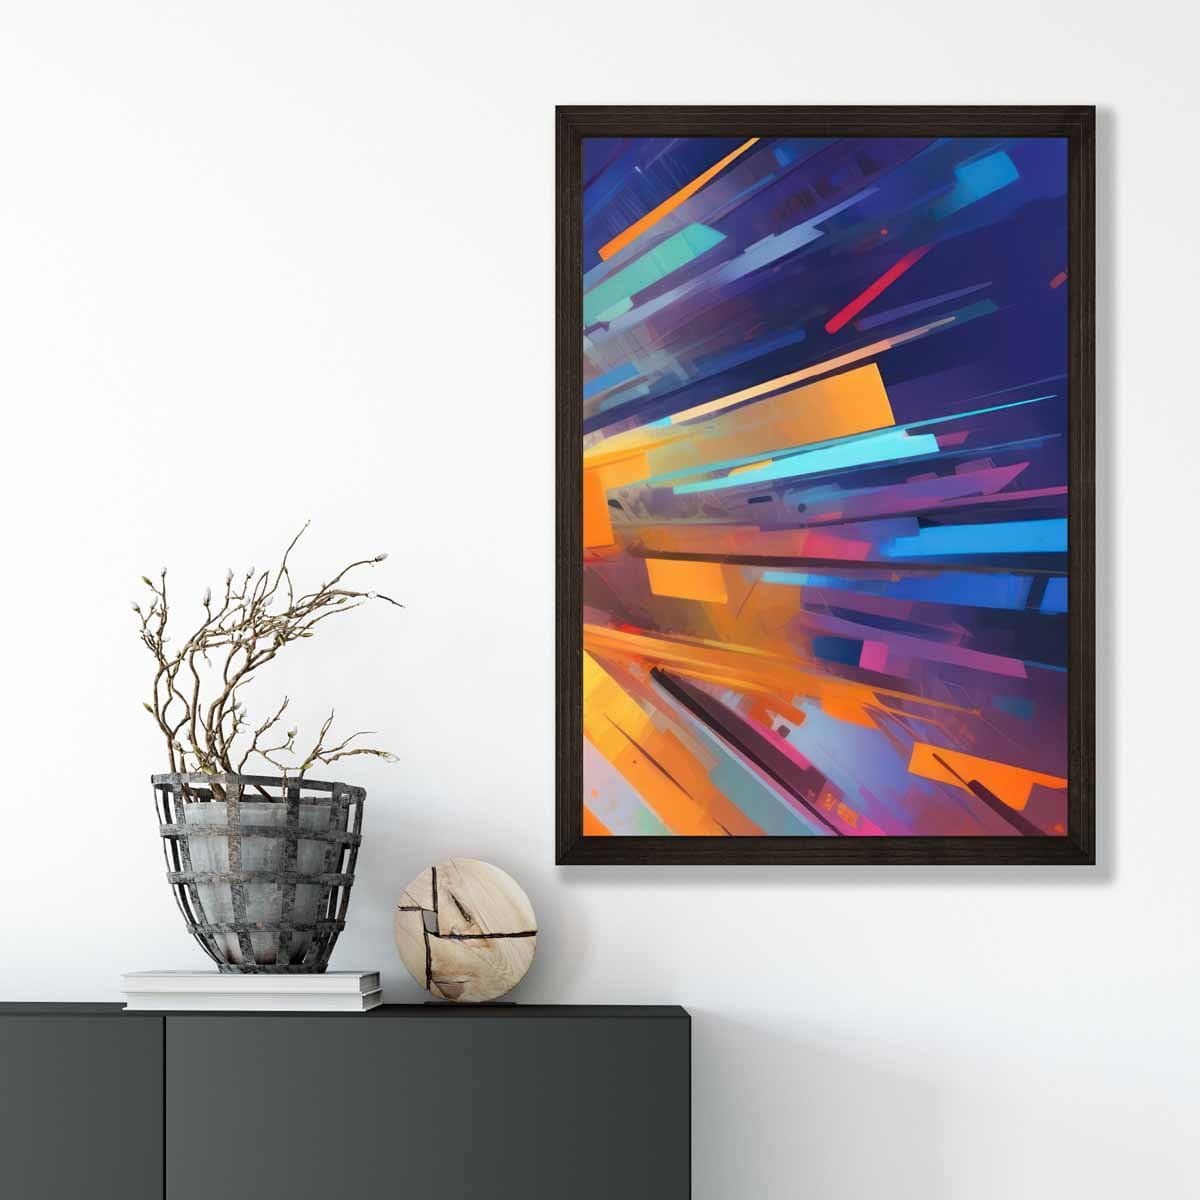 Abstract Shapes Art Print Blue Orange and Red No 4